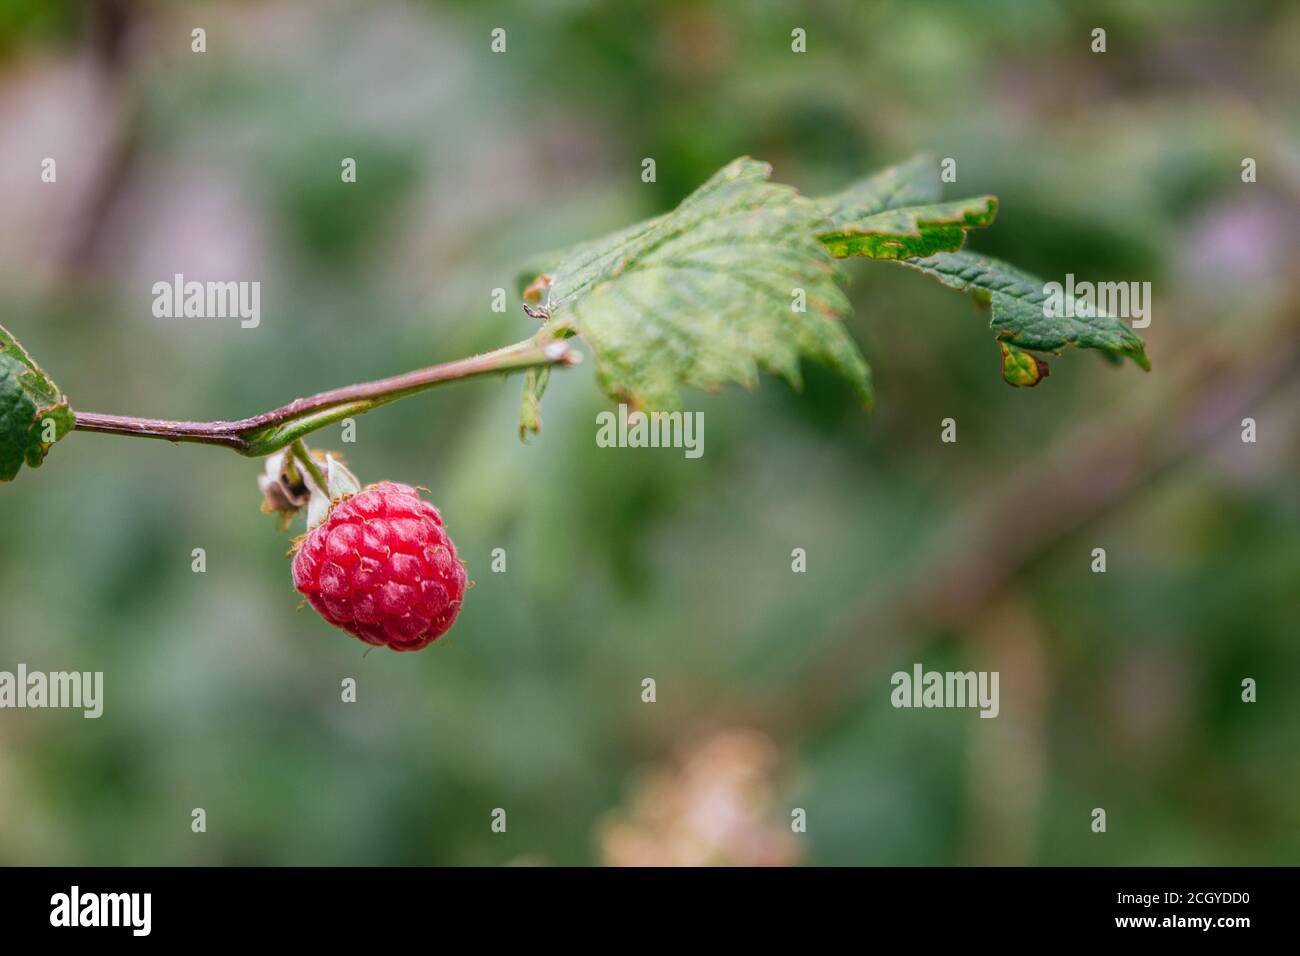 Stock photo of a close up of a isolated wild berry on a tree. Selective focus Stock Photo